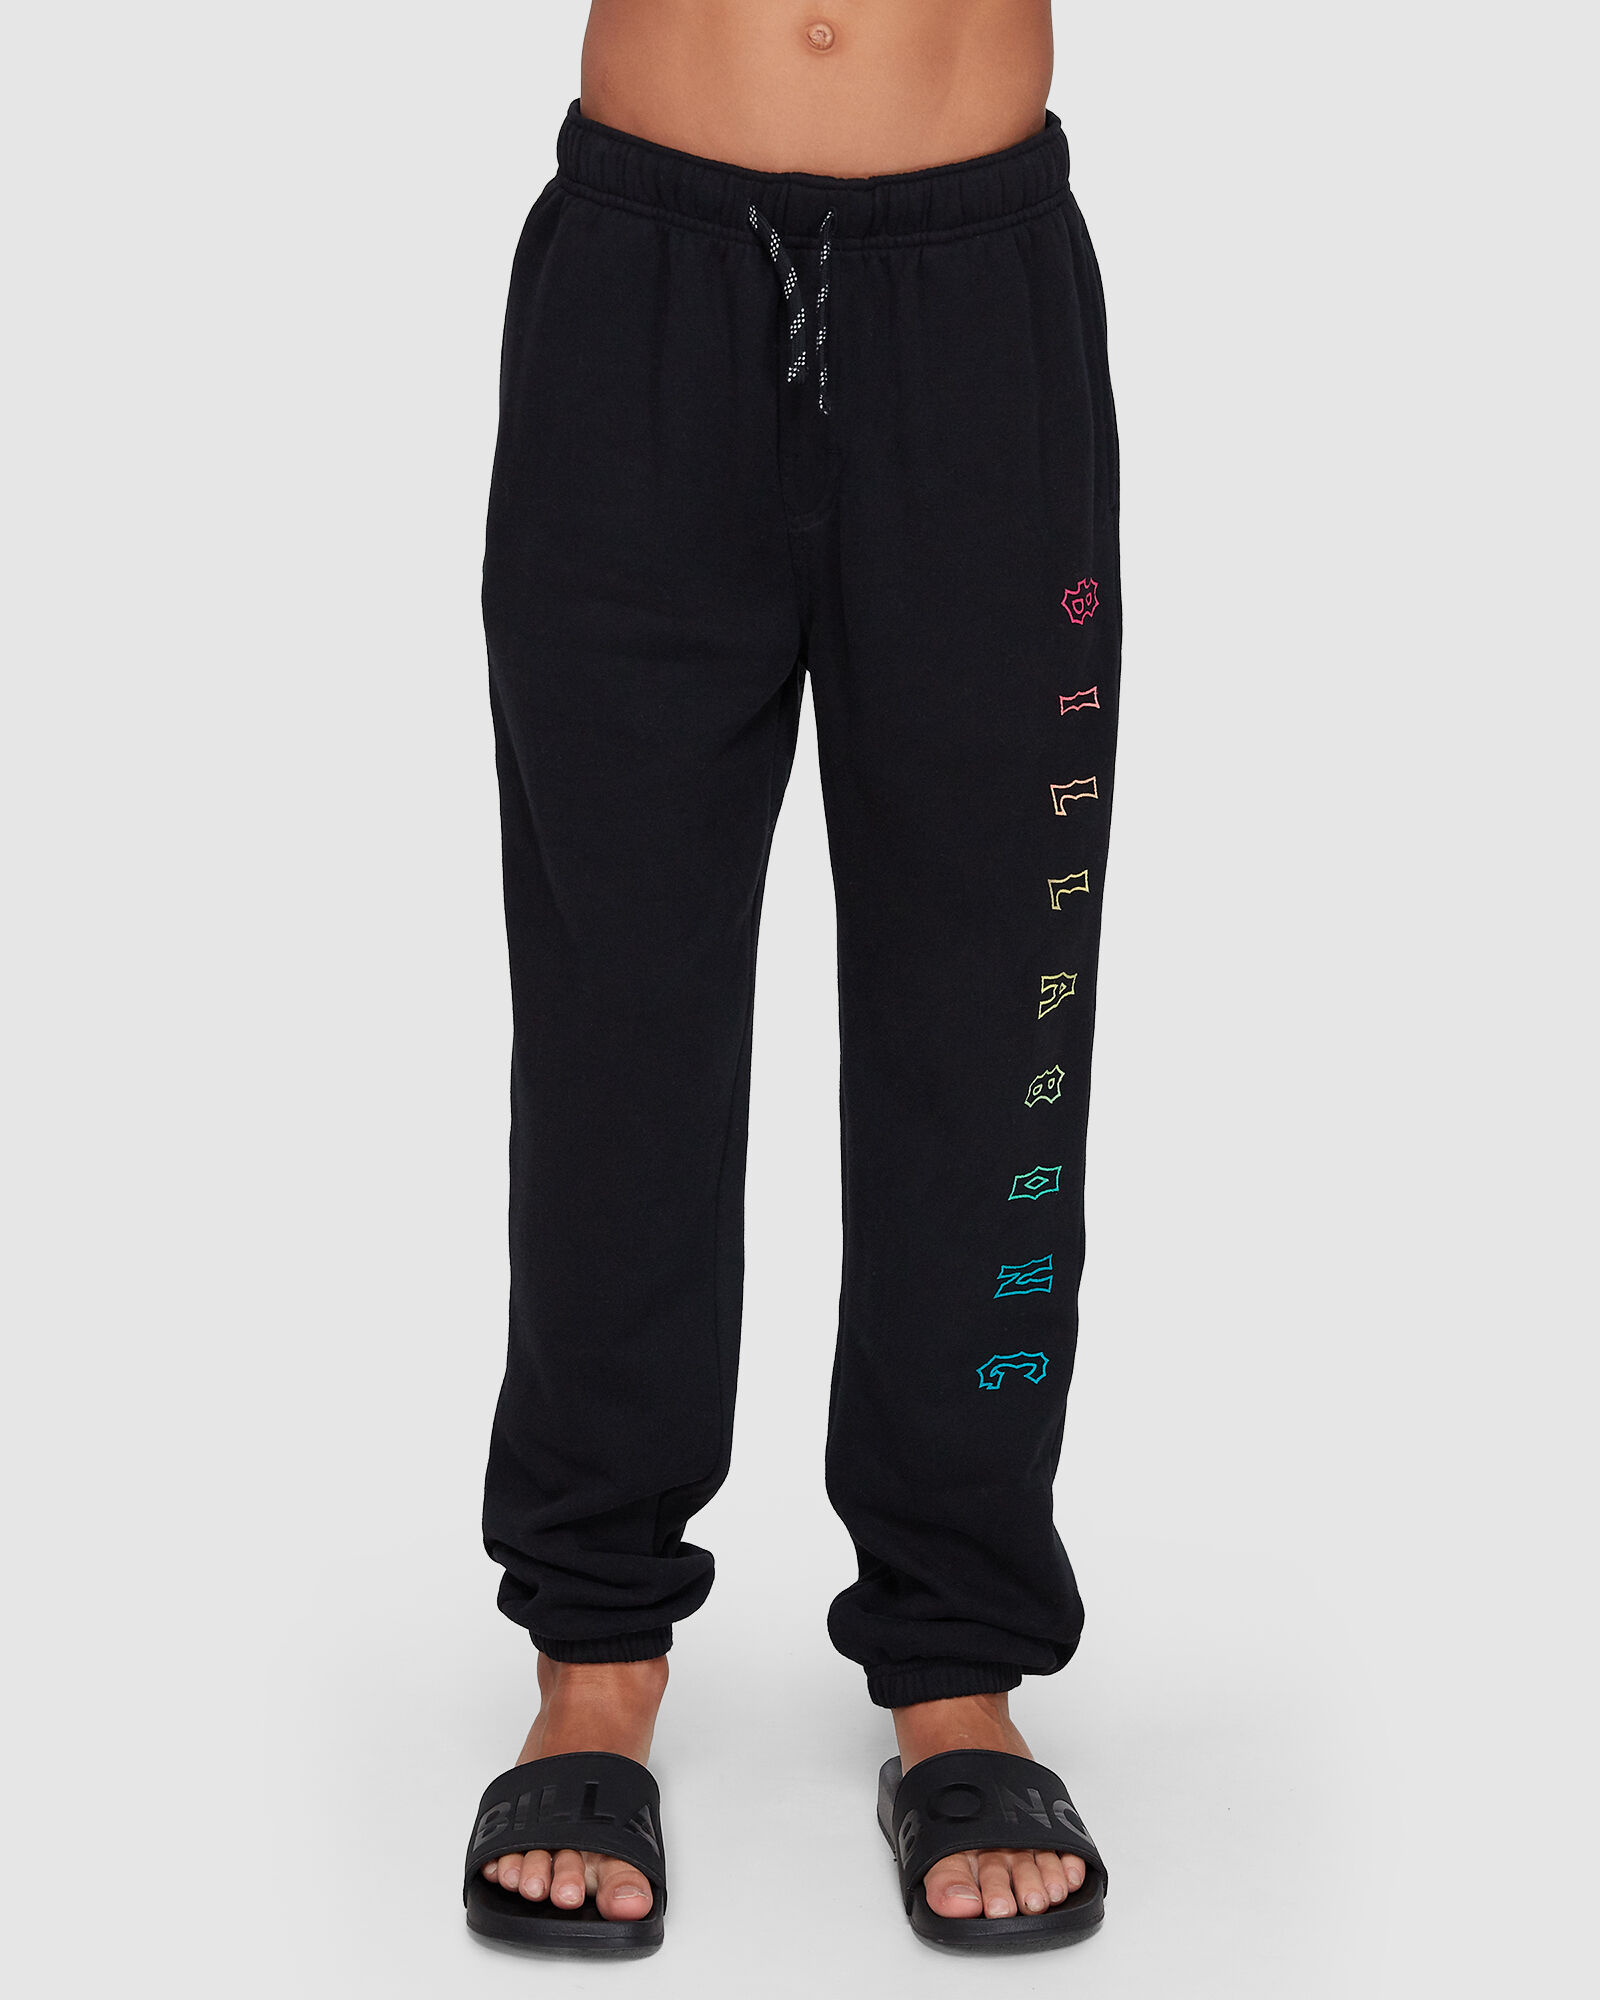 Share more than 70 best track pants india - in.eteachers